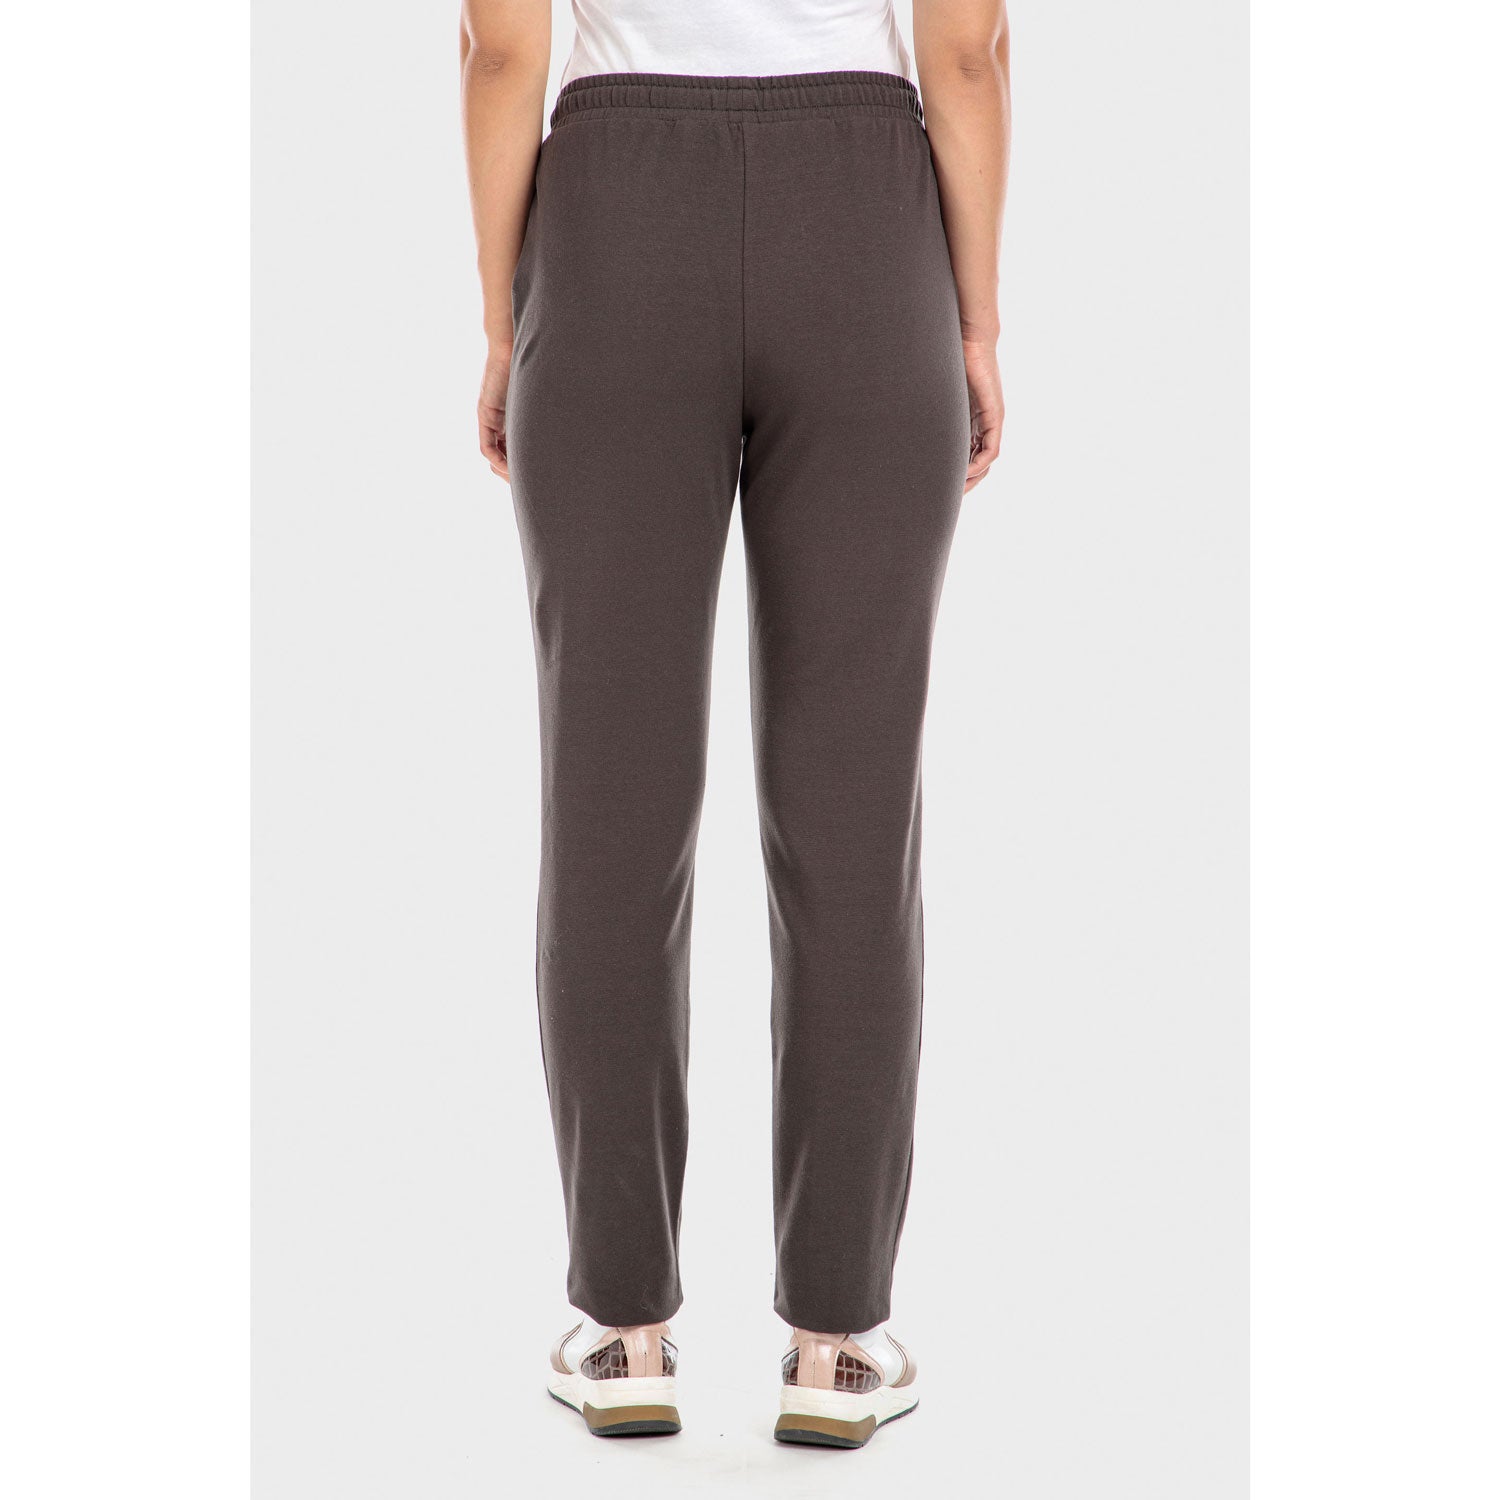 Punt Roma Casual Trousers - Brown Chocolate 2 Shaws Department Stores